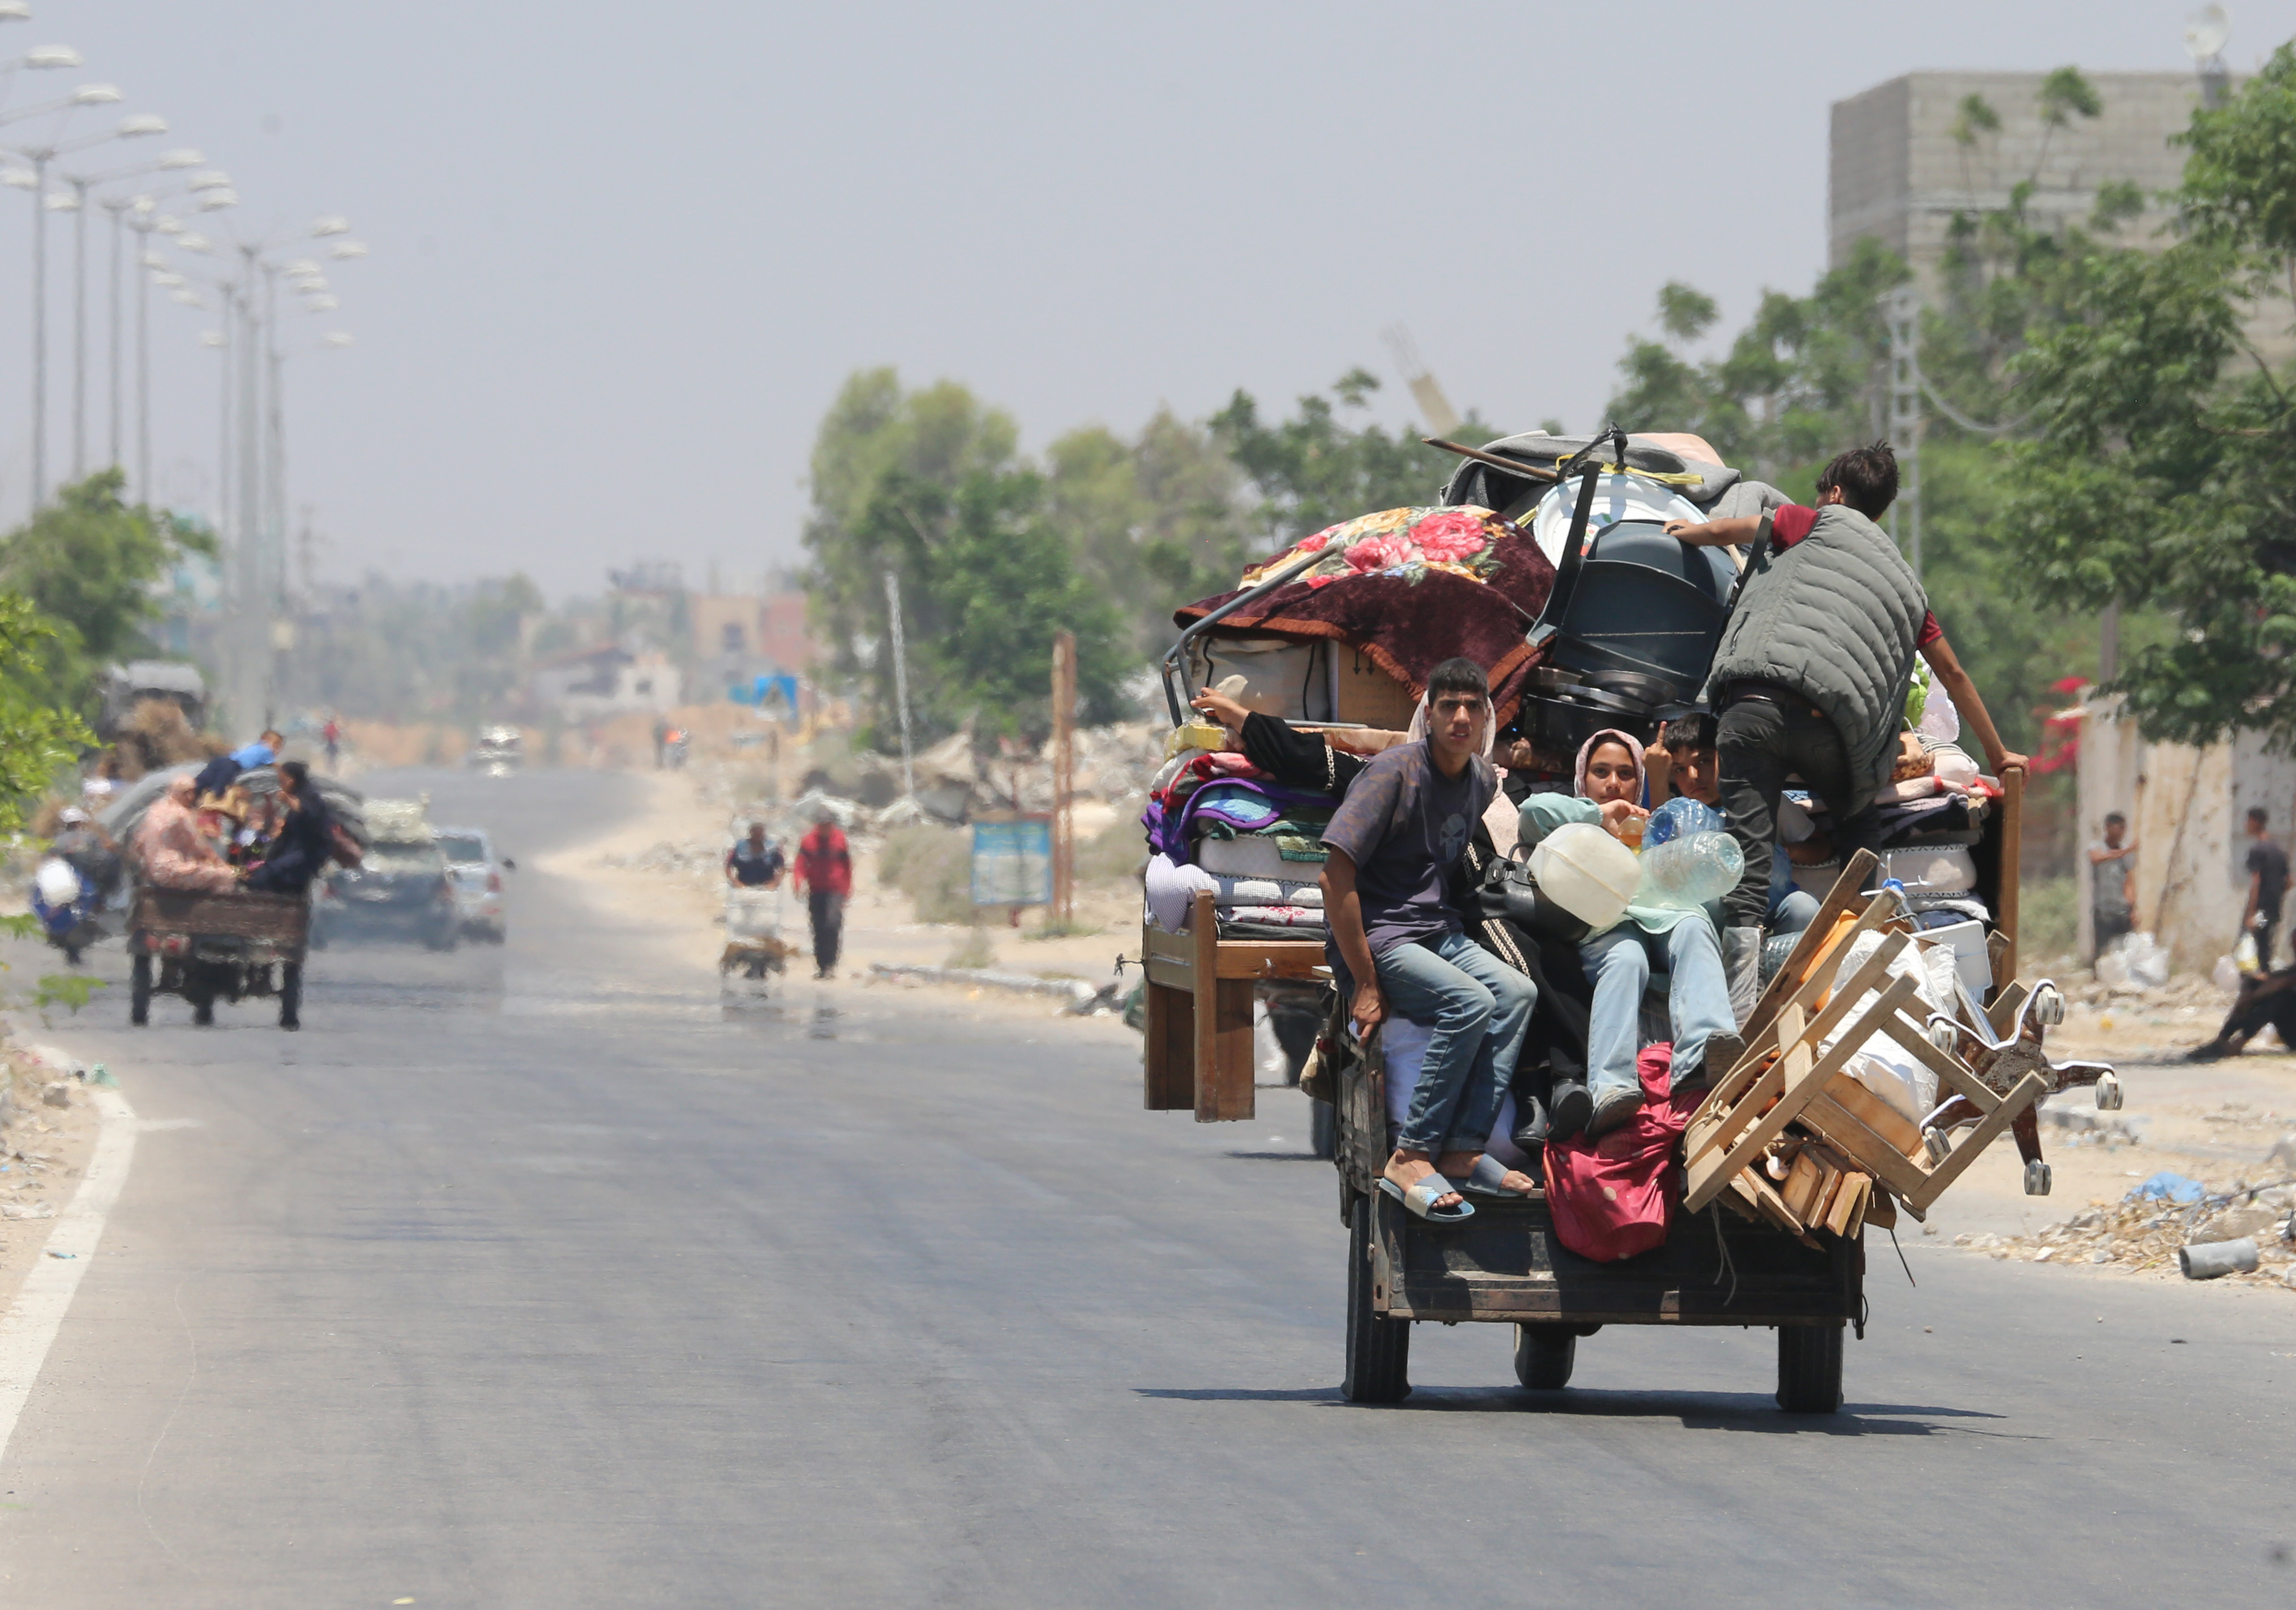 Young people in Gaza sit on a cart loaded with furniture and other belongings and leave the destroyed city